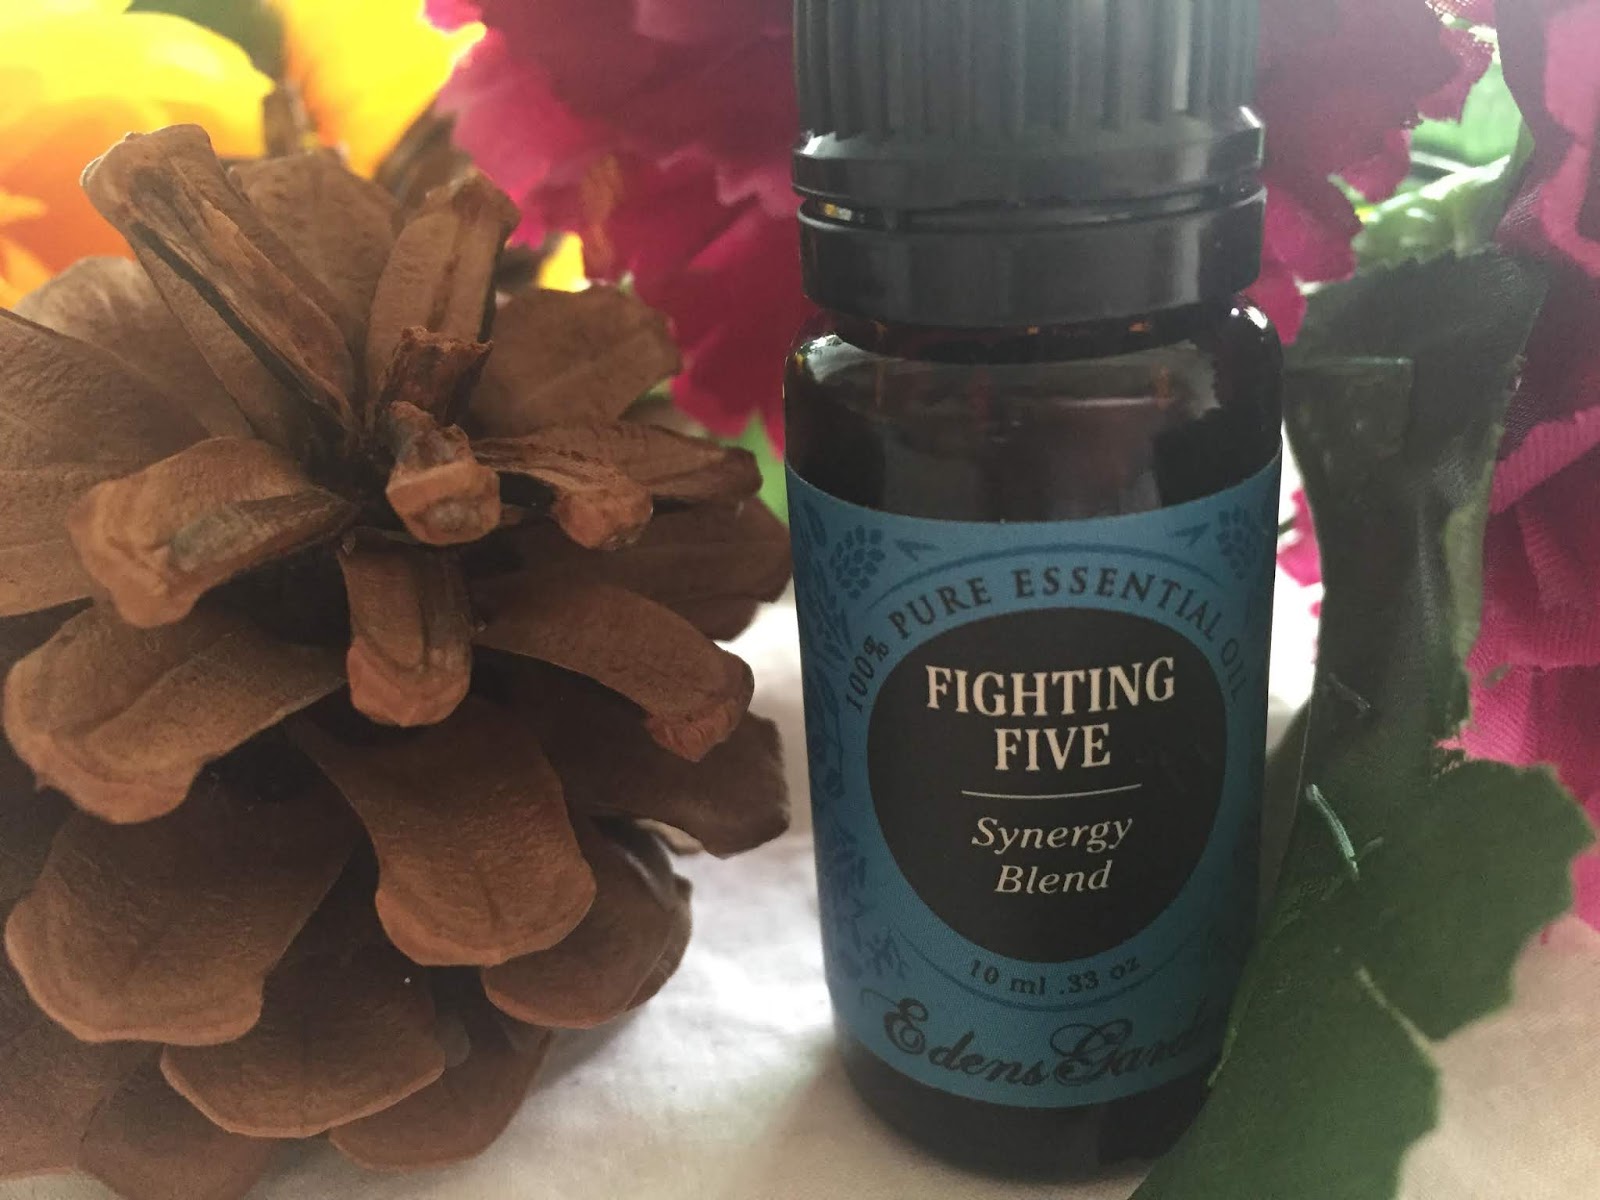 Edens Garden Fighting Five Synergy Blend Essential Oil Review